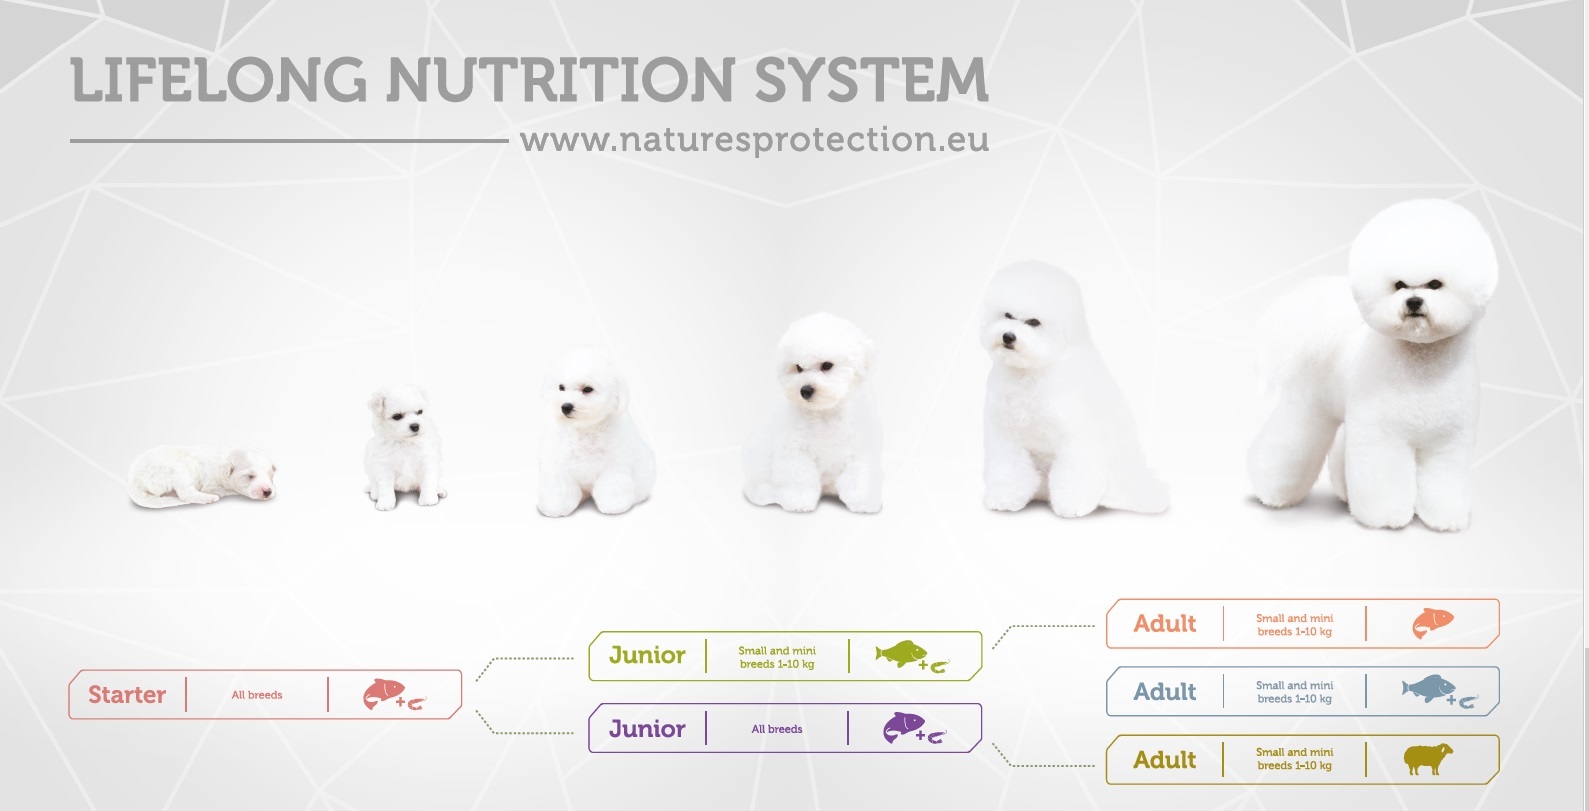 Nature's Protection Superior Care White Dogs